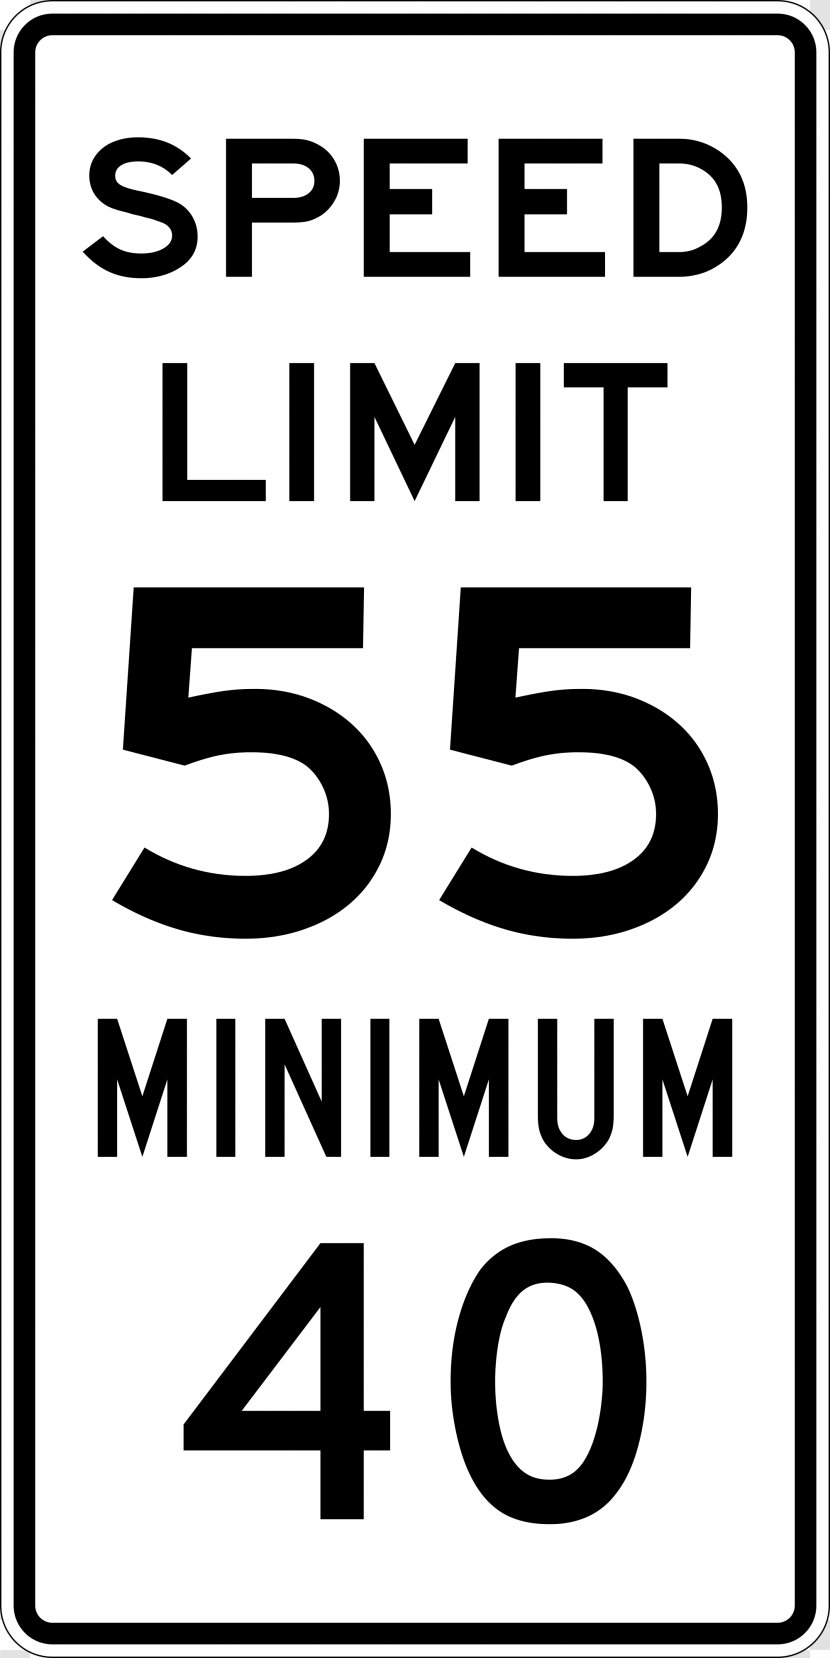 Speed Limit Traffic Sign School Zone Driving - Symbol Transparent PNG